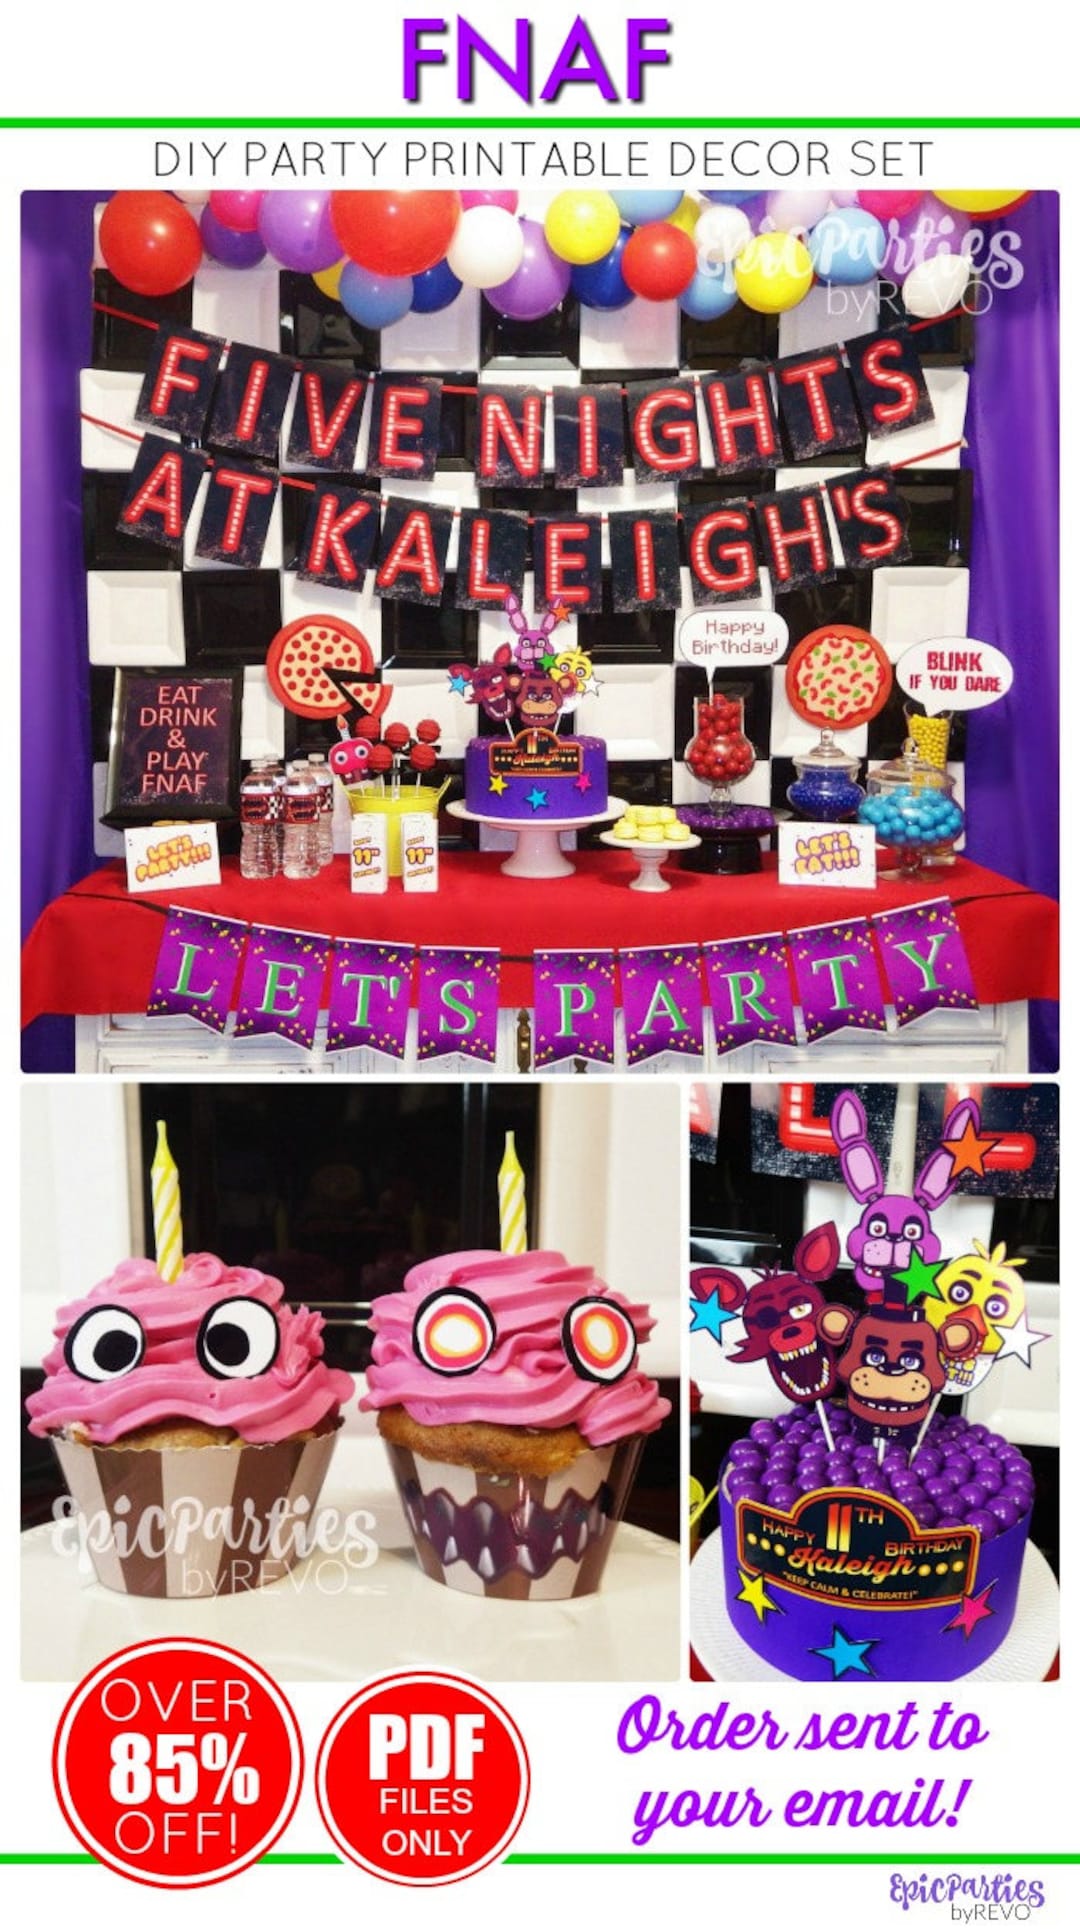  Five Nights at Freddys 3 Birthday Banner Personalized Party  Backdrop Decoration 60x42 Inches - 5x3 Feet : Home & Kitchen